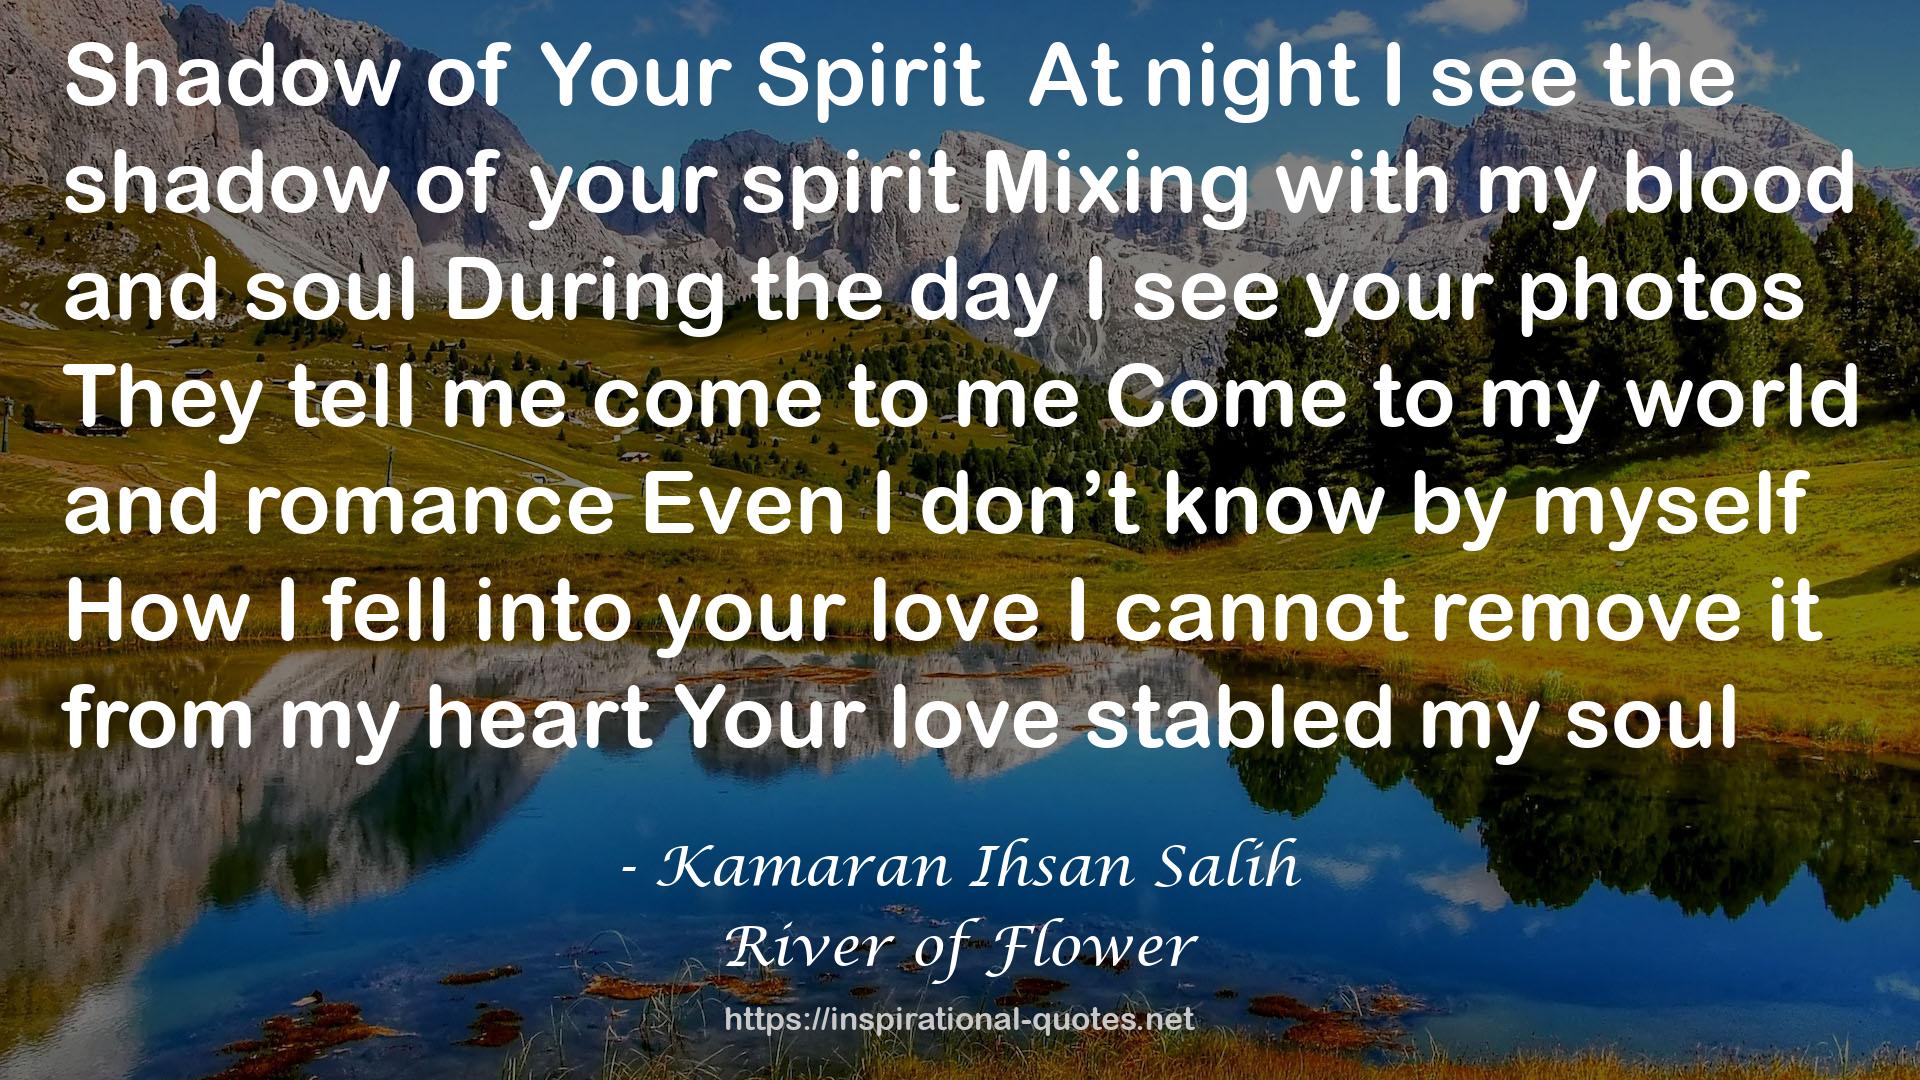 River of Flower QUOTES